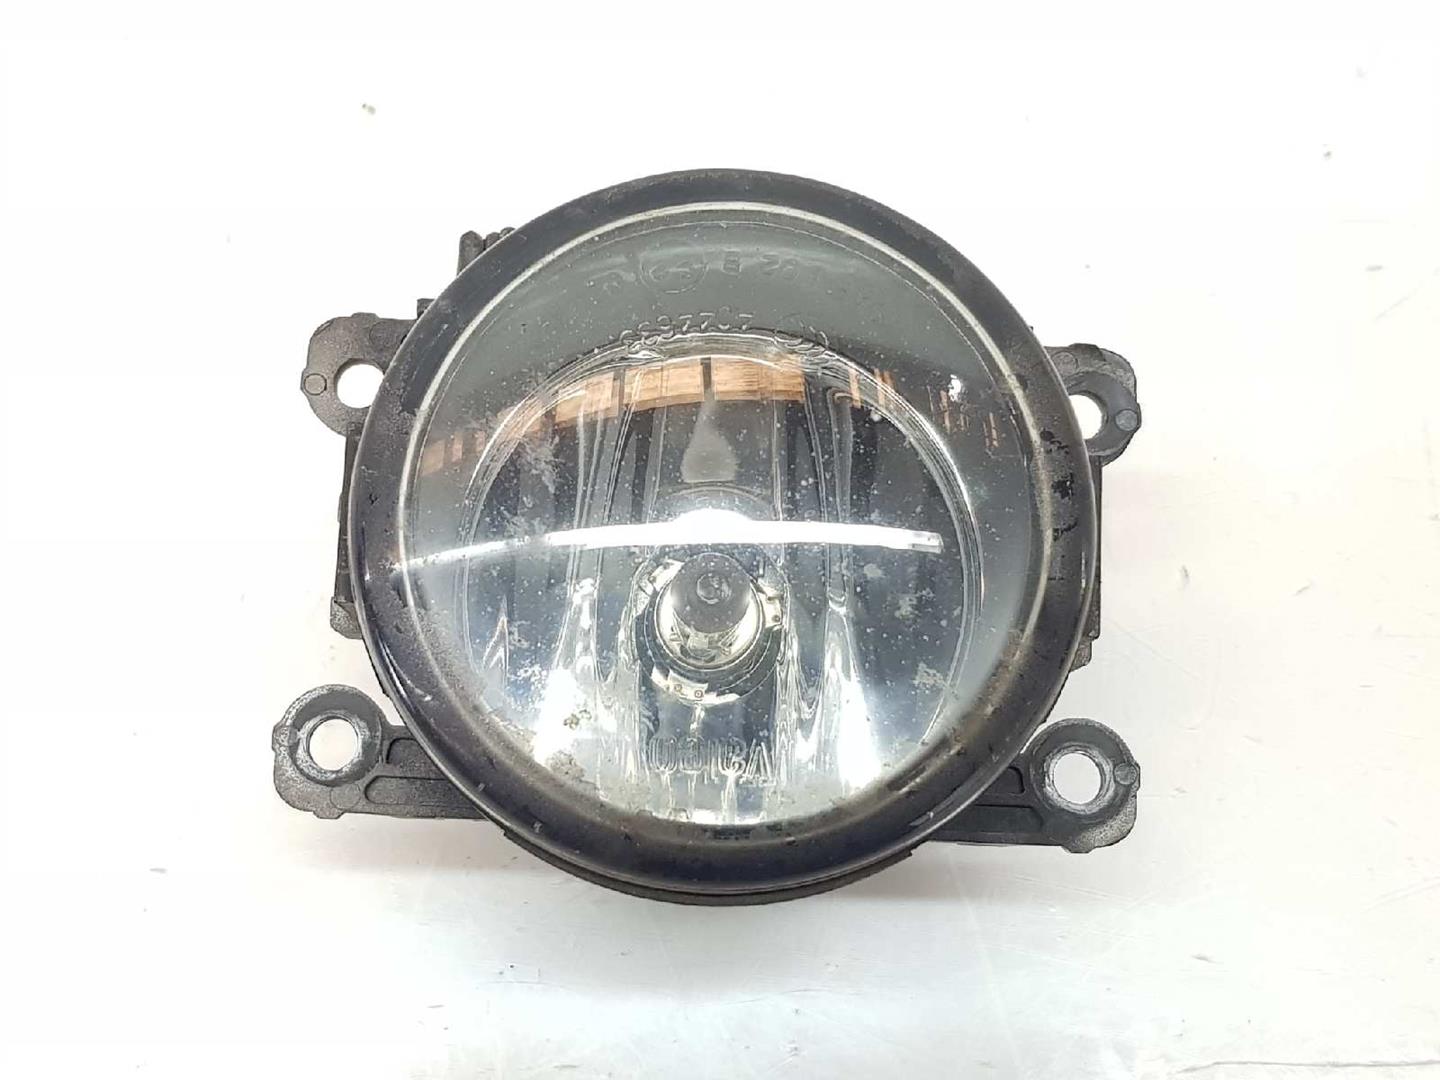 LAND ROVER Discovery 4 generation (2009-2016) Front Right Fog Light LR057400, 89207191, LR057400 19871956